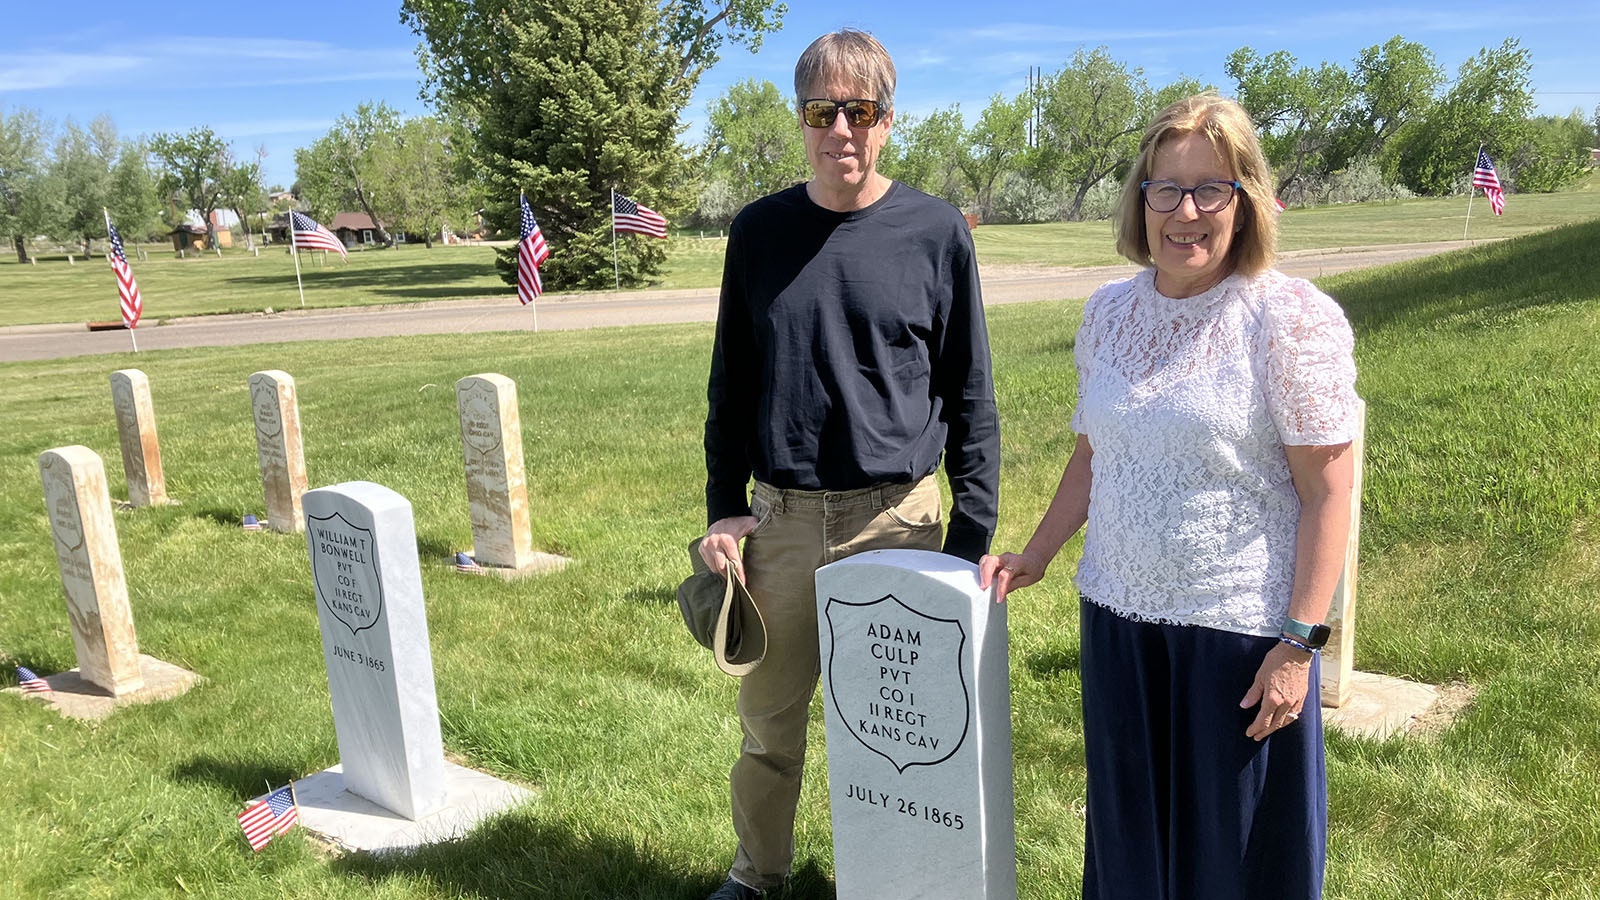 Brother and sister, Jim Baker and Elizabeth Jennings stand next to the commemorative headstone honoring their great-great-grandfather Francis’ brother, Adam Culp. Frances also served at Platte Bridge Station.